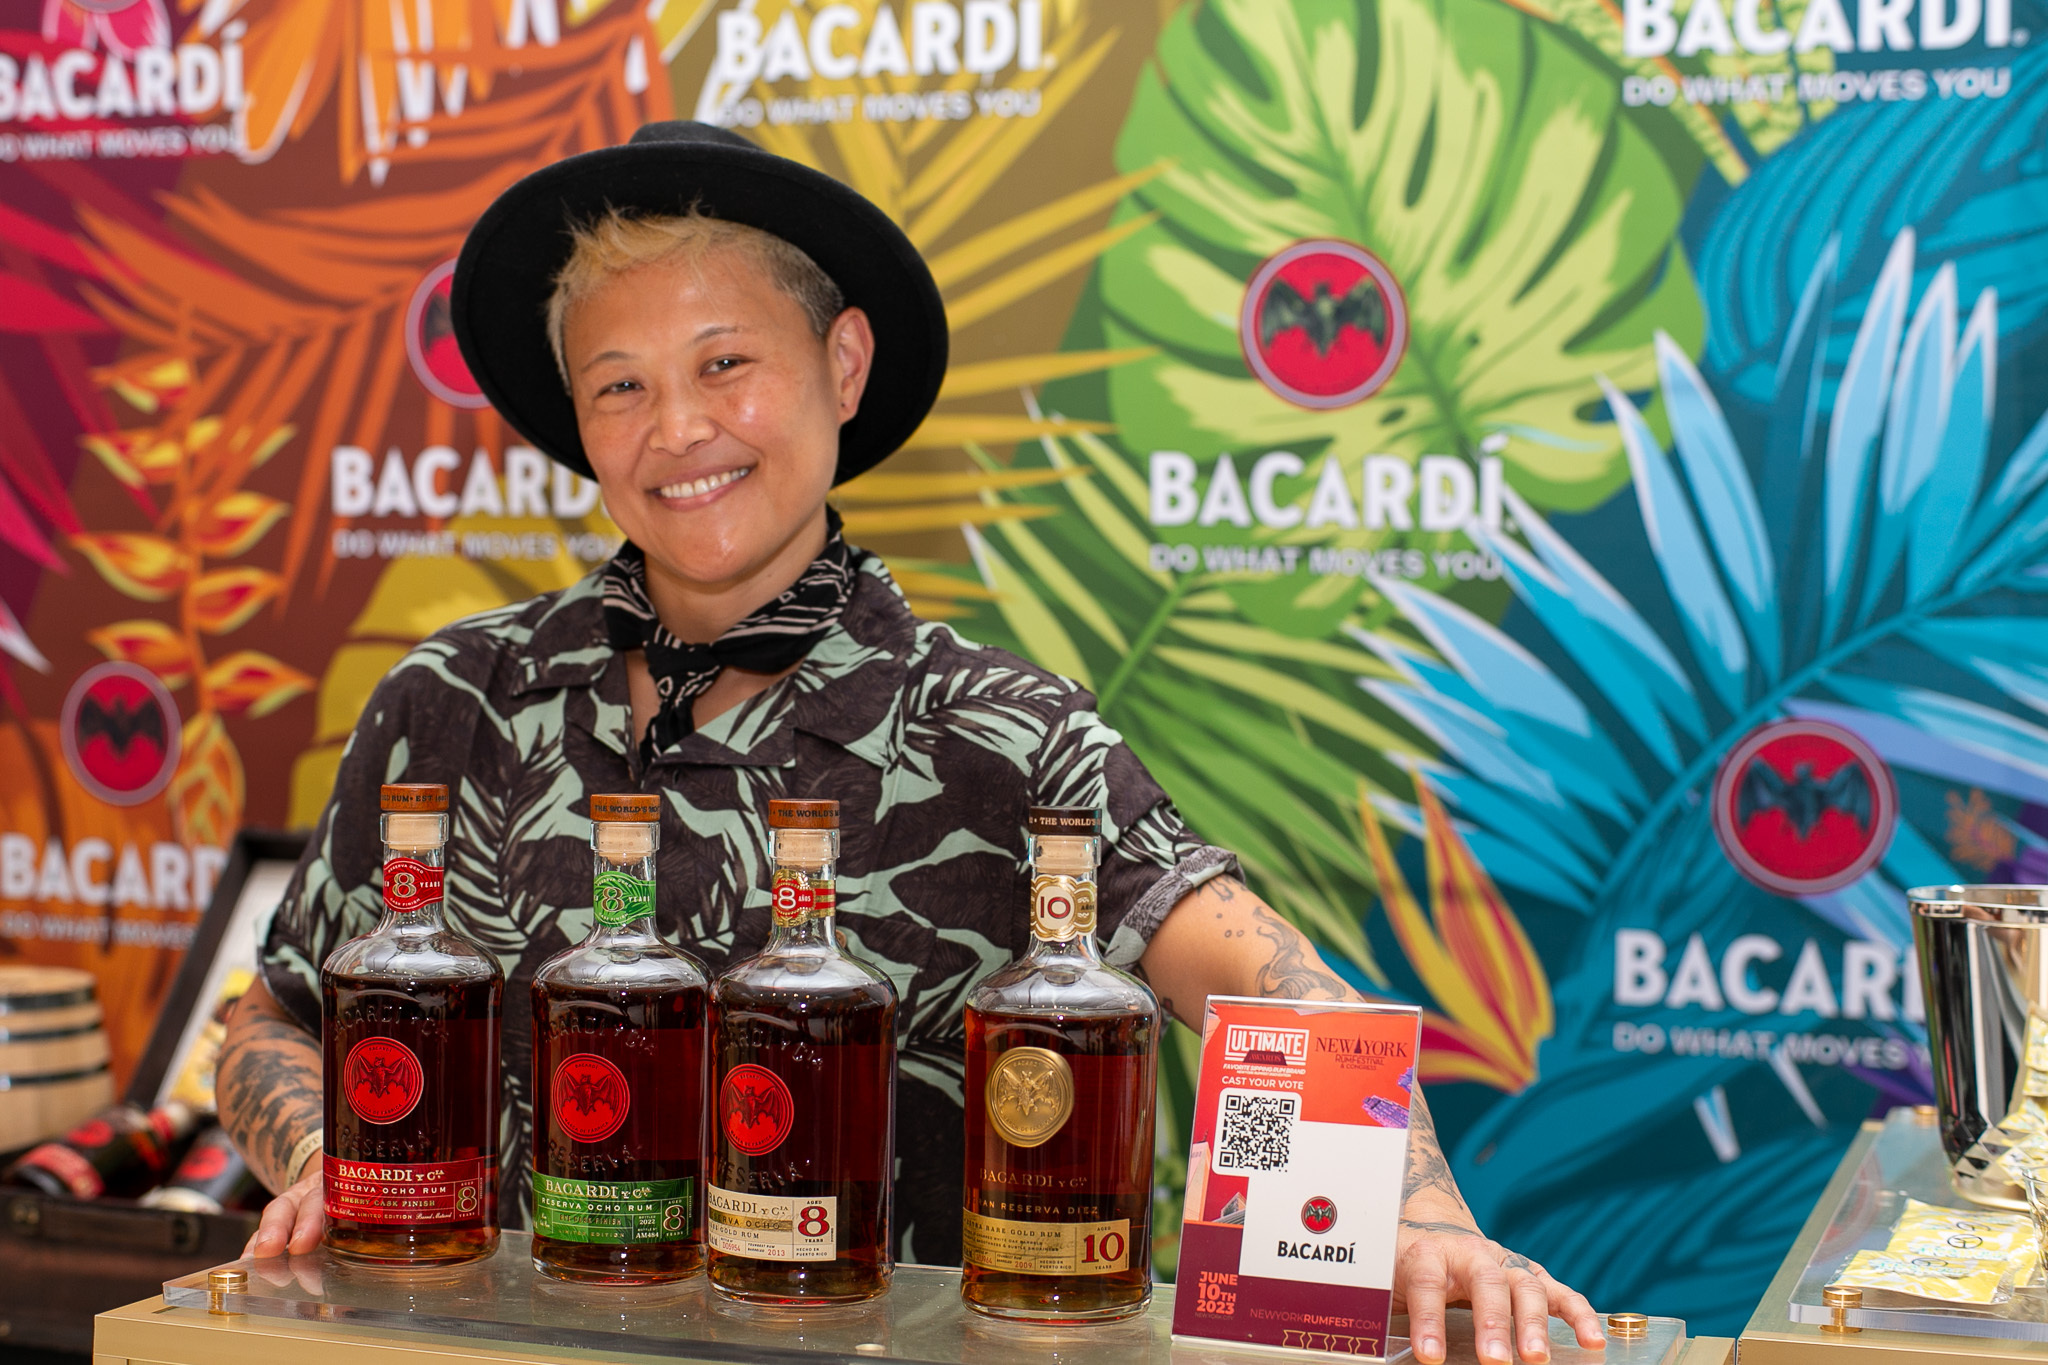 Cheers! The 7th annual New York Rum Festival is coming to Greenpoint